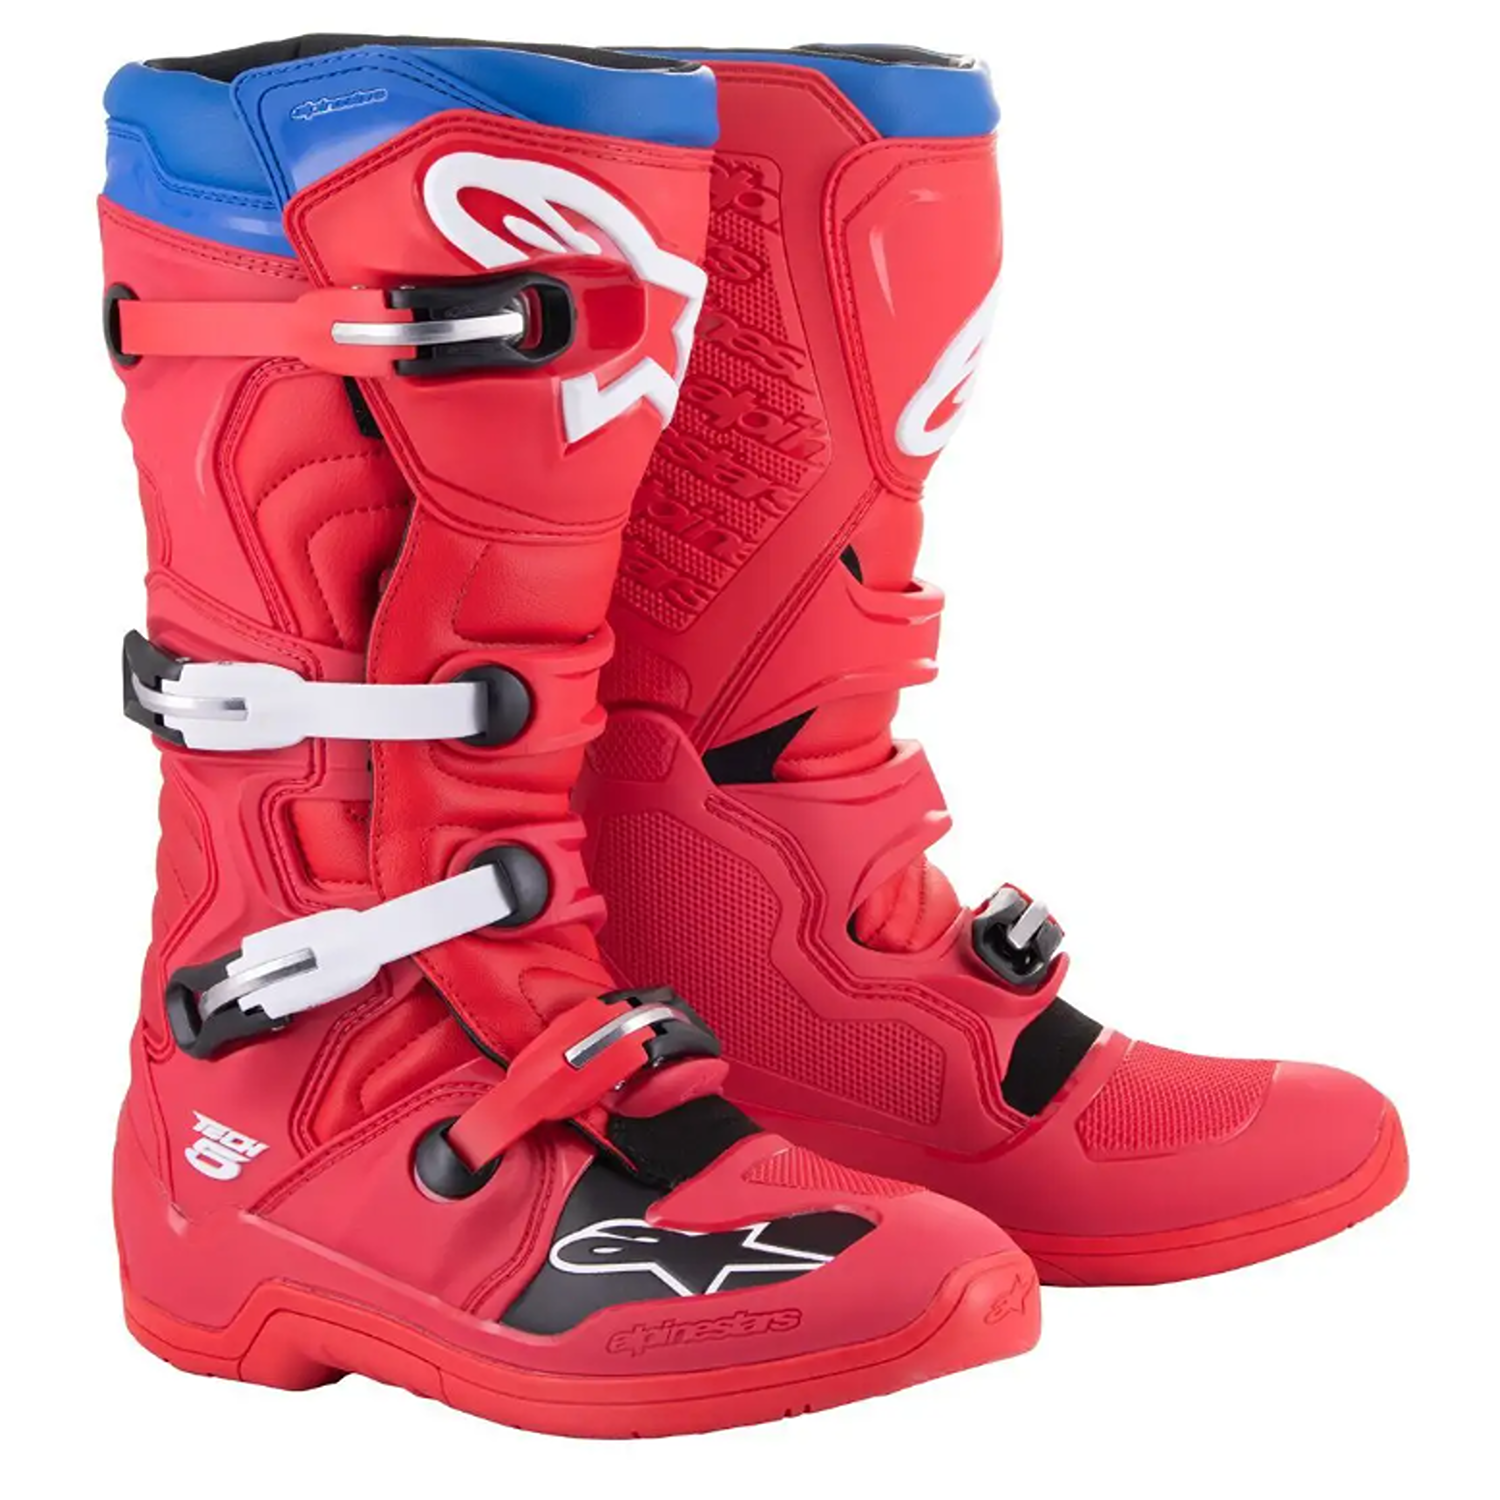 Image of Alpinestars Tech 5 Boots Bright Red Dark Red Blue Size US 5 ID 8059347199306